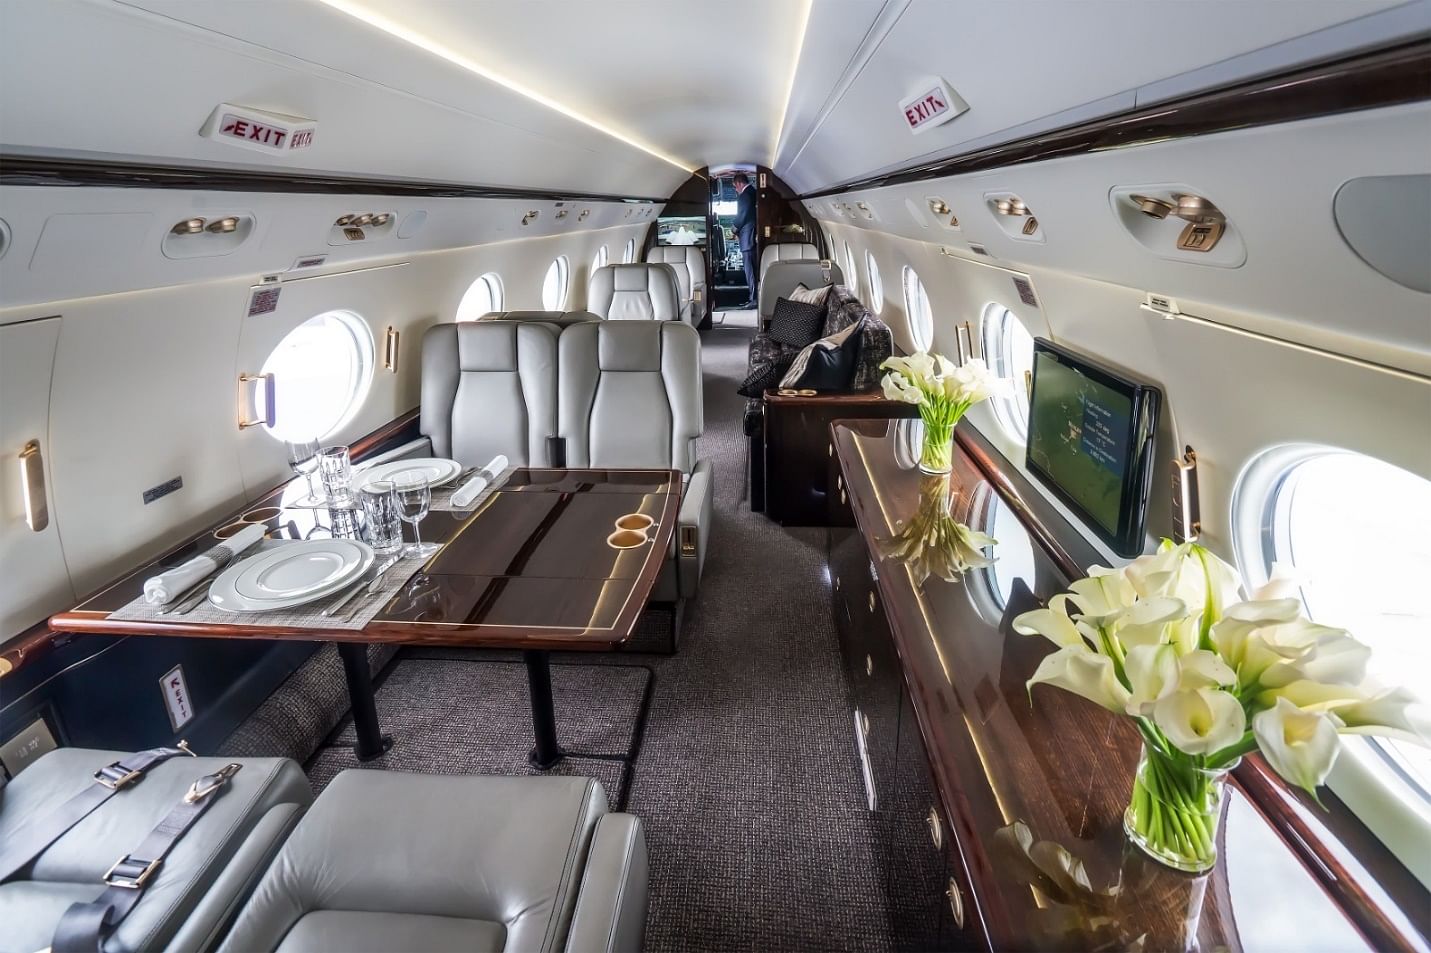 For Unforgettable Bonding: Charter A Private Jet